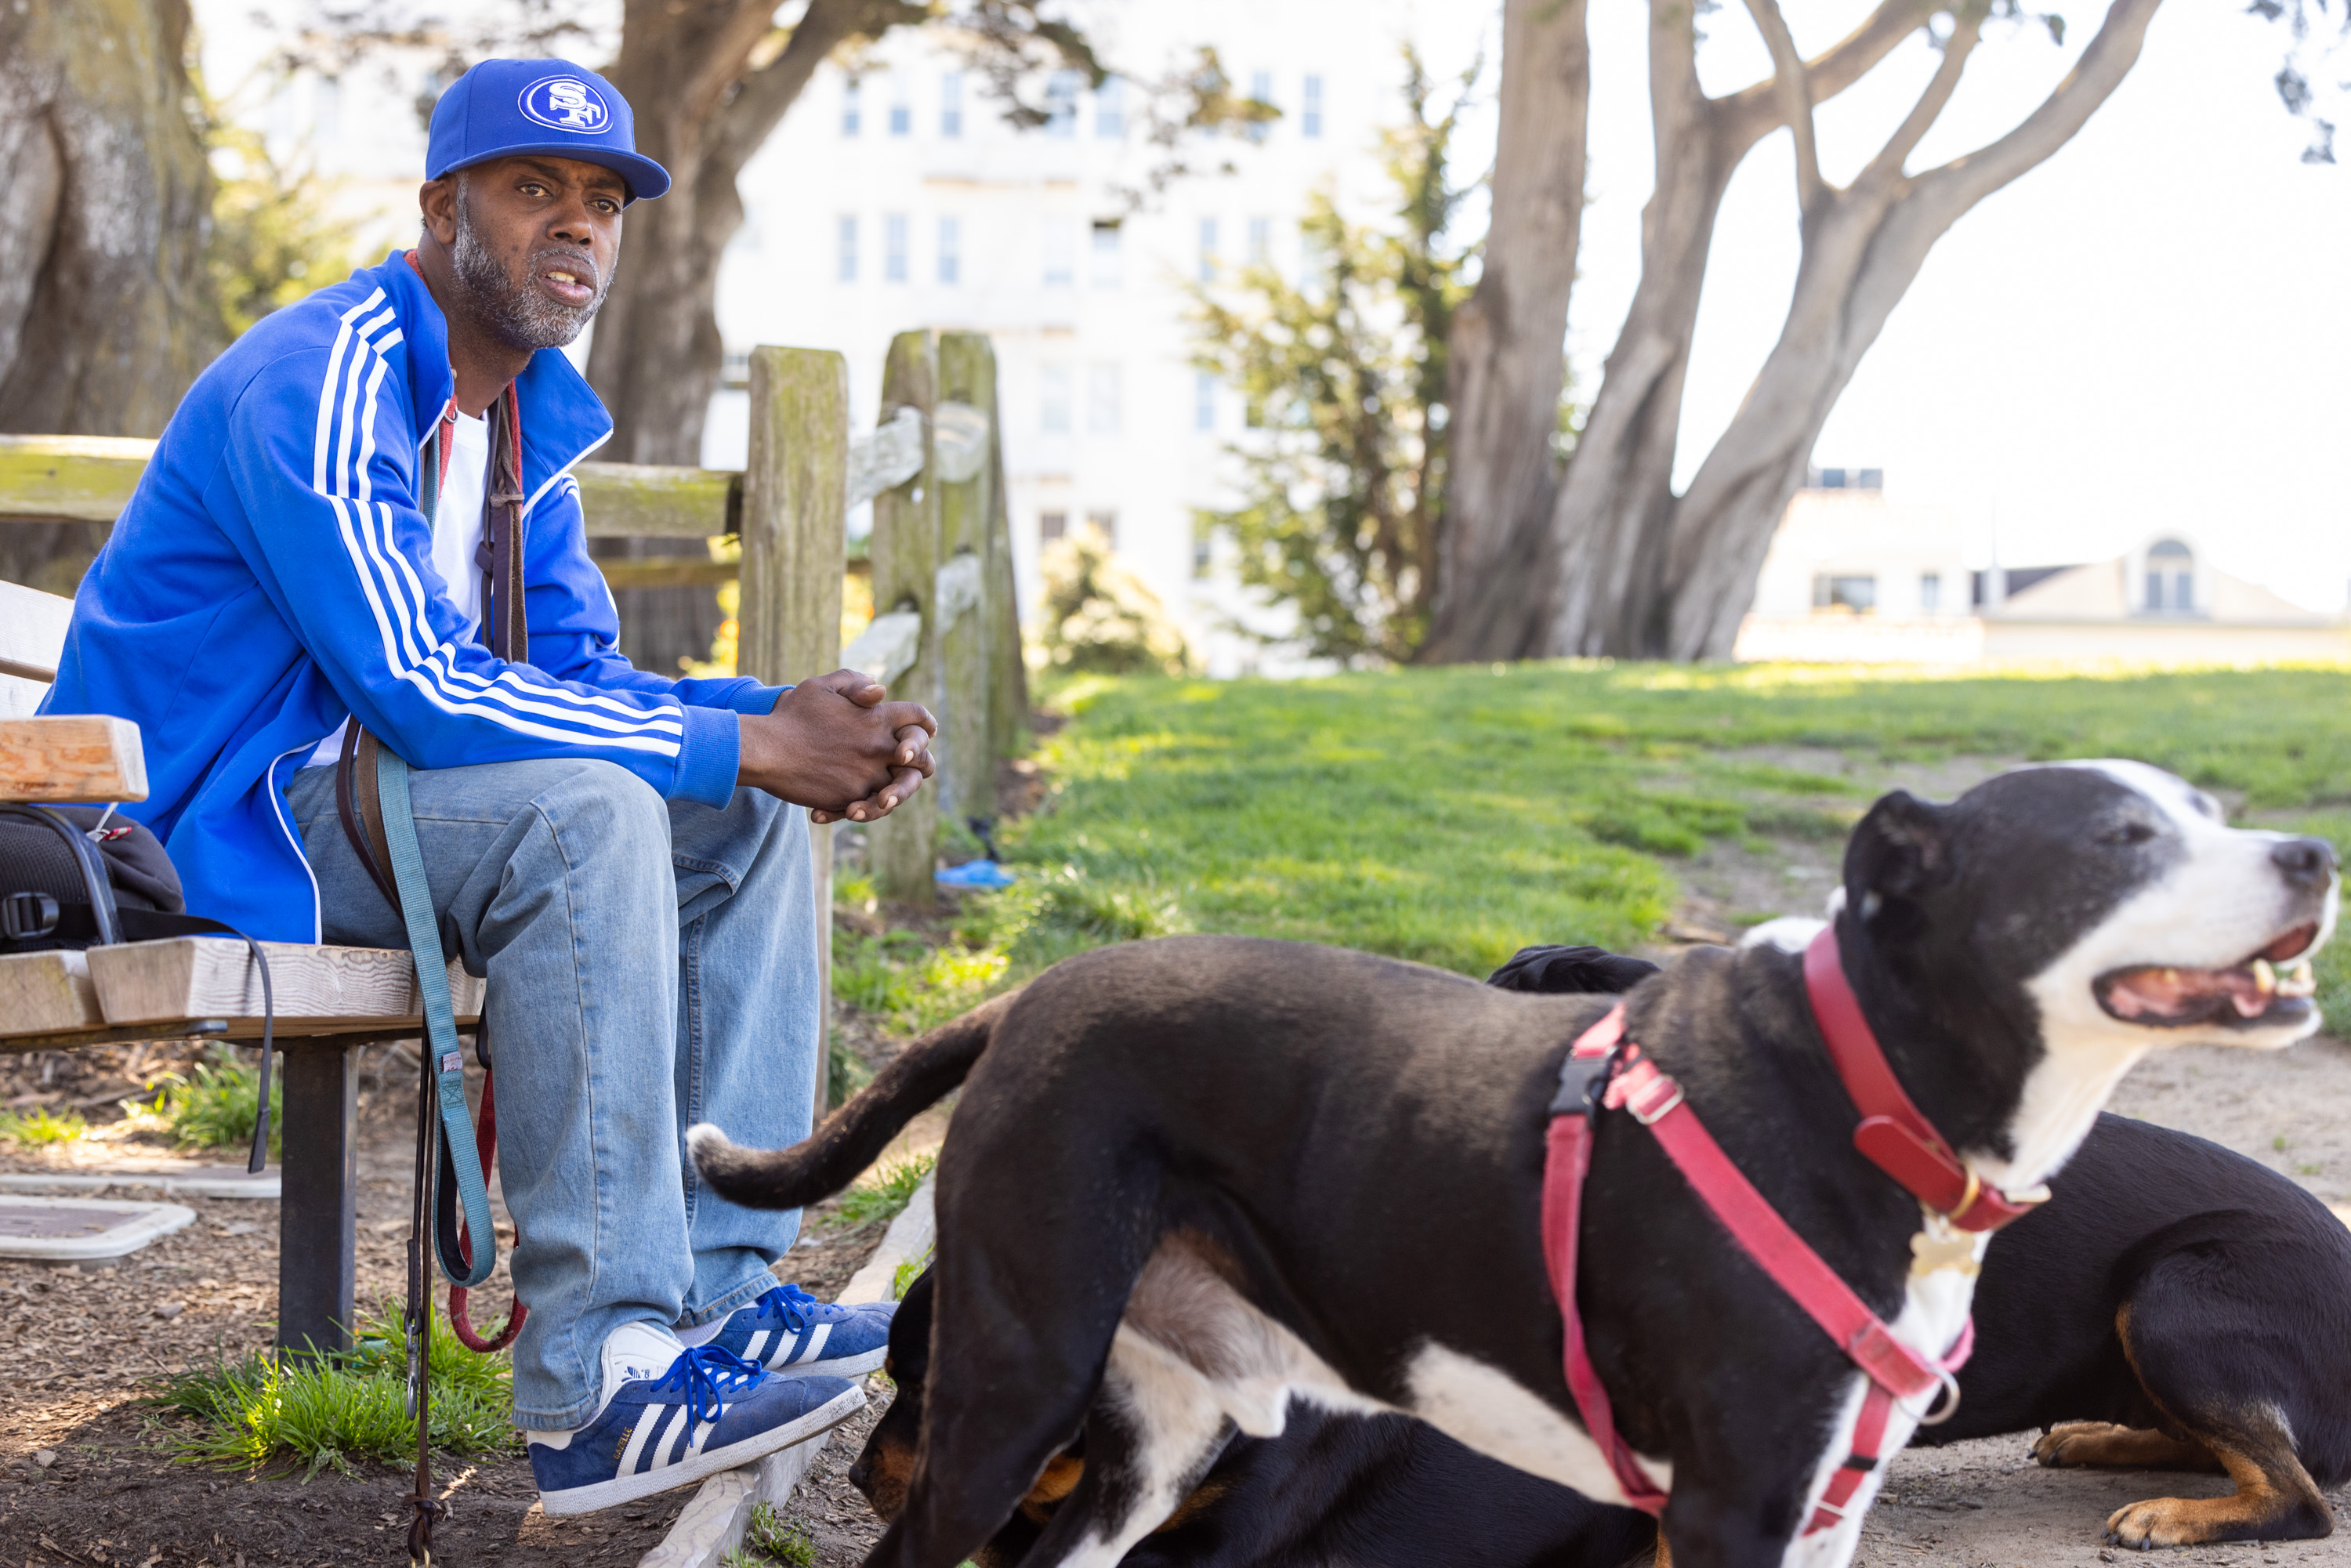 A man in a blue tracksuit sits on a bench beside a playful black and white dog in a park.